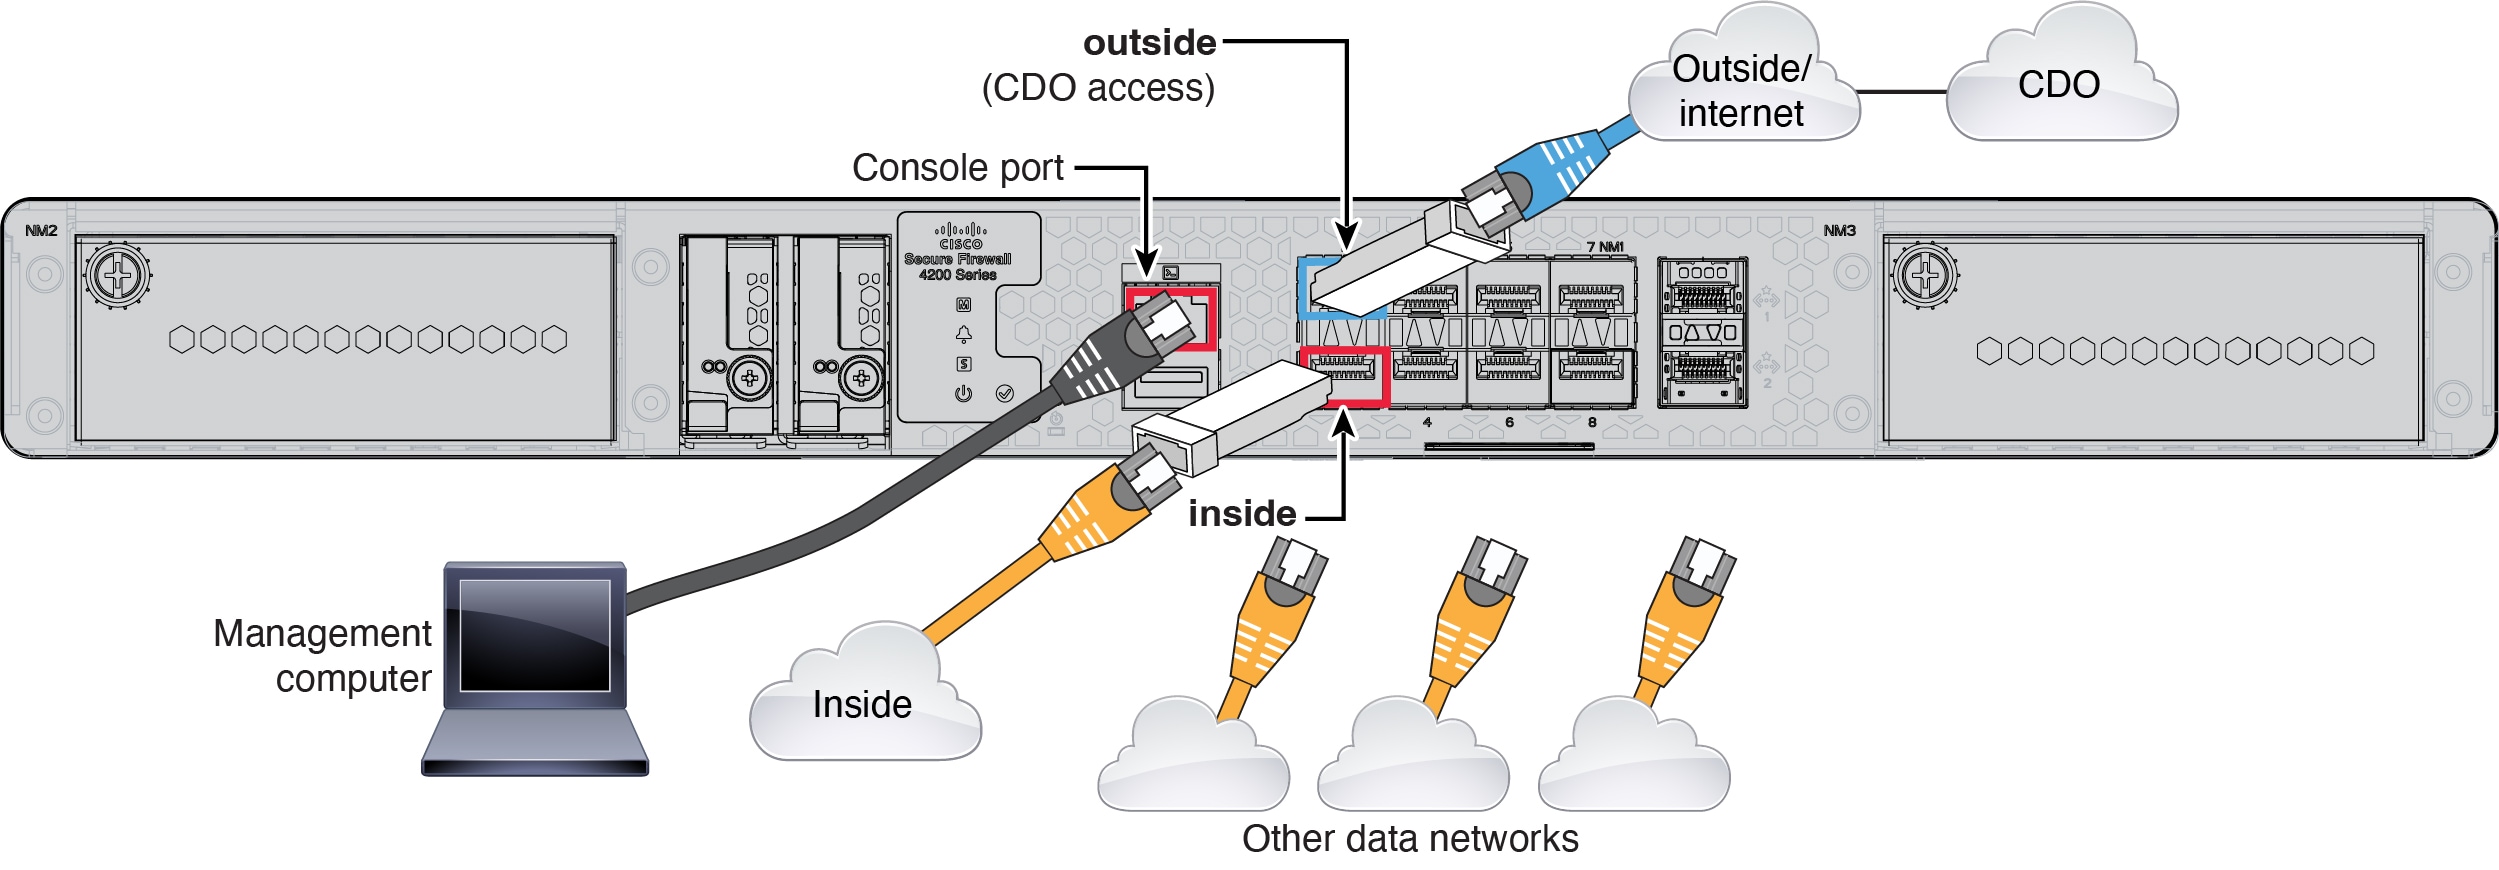 Cabling the Secure Firewall 4200